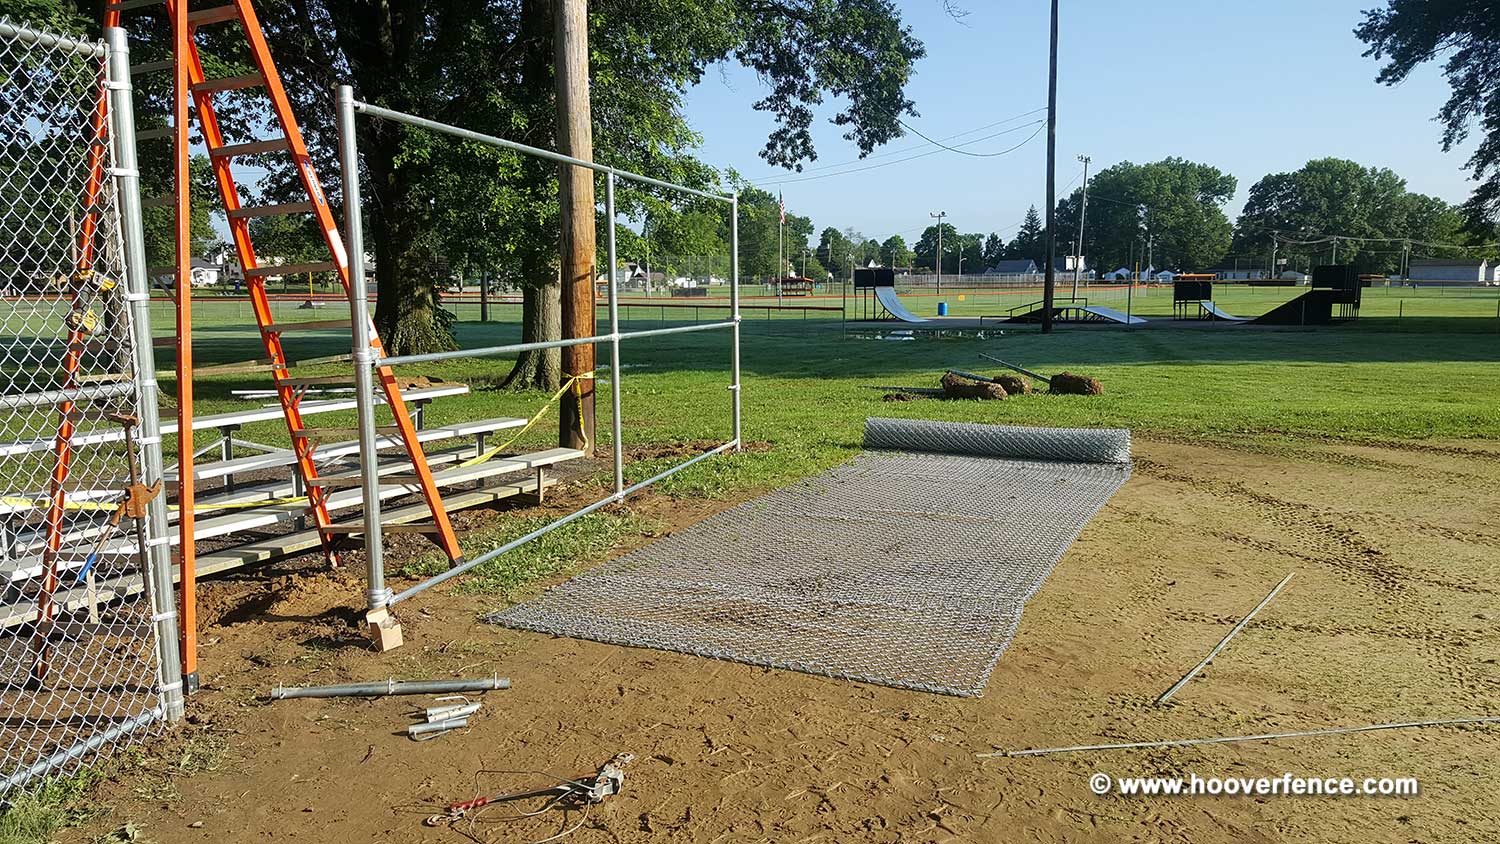 Hoover Fence Co Installation BS-F37 Baseball Sideline Fence - Field 6 - Newton Falls, OH